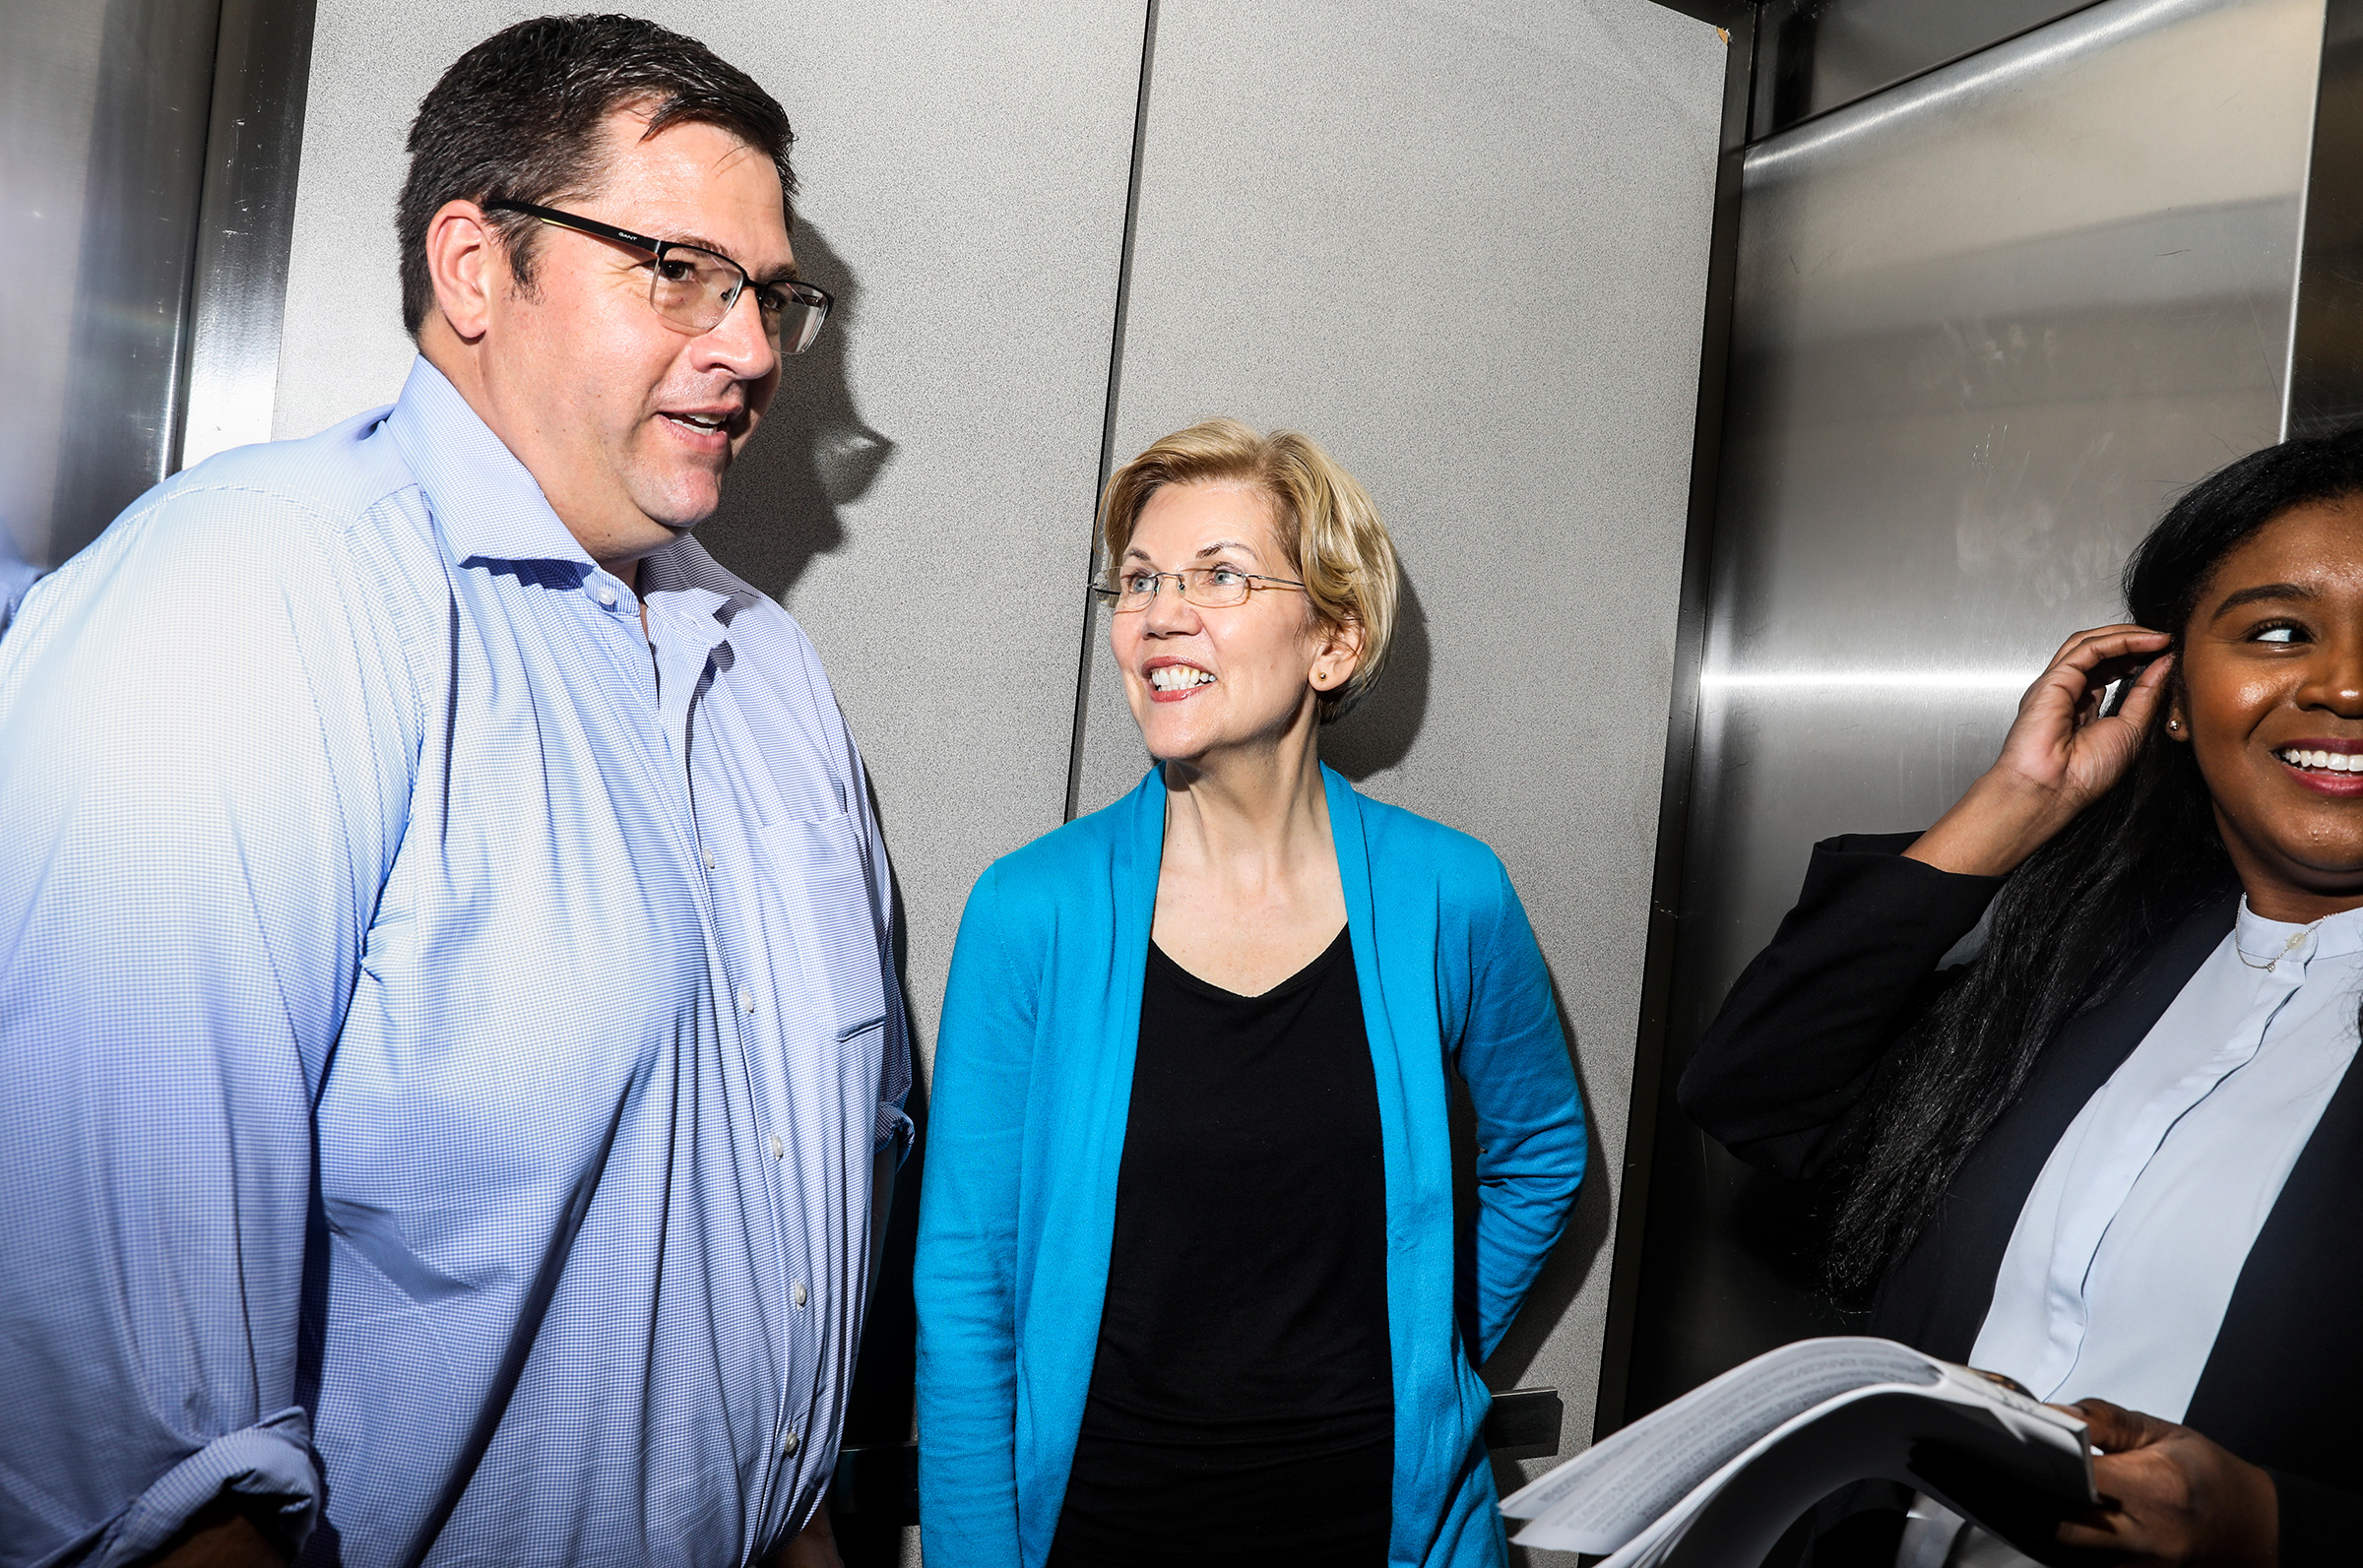 Warren and her son, Alex, in the elevator on the way up to an organizing event at Iowa State University on May 3. (Krista Schlueter for TIME)